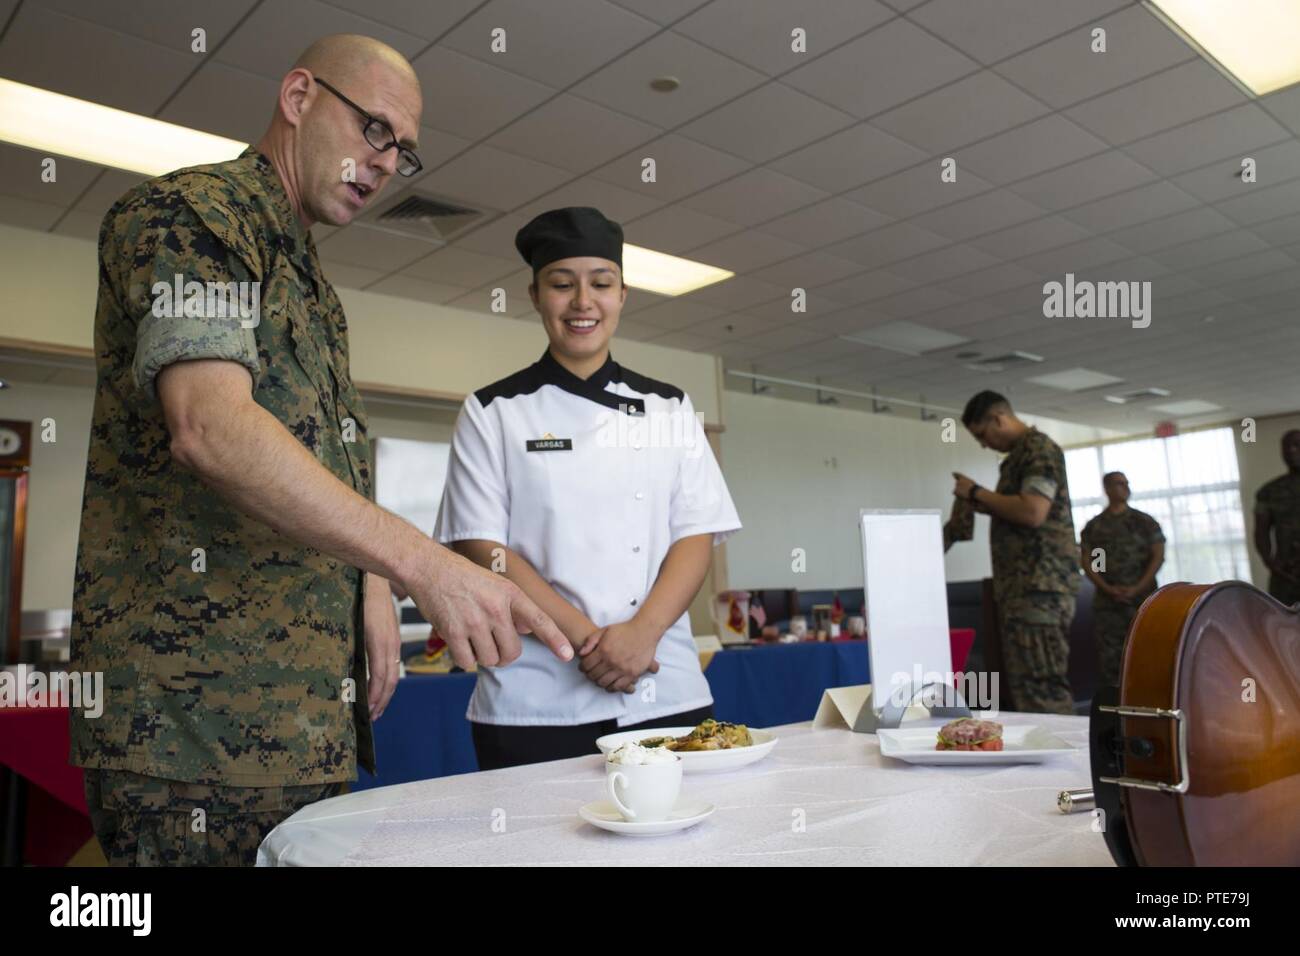 U.S. Marine Corps Sgt. Maj. Jason R. Cain, left, sergeant major of Headquarters and Headquarters Squadron (H&HS), talks to Lance Cpl. Erika Vargas, right, a food service specialist with, about the dark chocolate mousse she prepared for the Food Service Specialist of the Quarter competition at Marine Corps Air Station (MCAS) Iwakuni, Japan, July 13, 2017. The event prepared Marines for a larger competition July 226-27 in Okinawa. Vargas took first place, surpassing her placement last quarter. Stock Photo